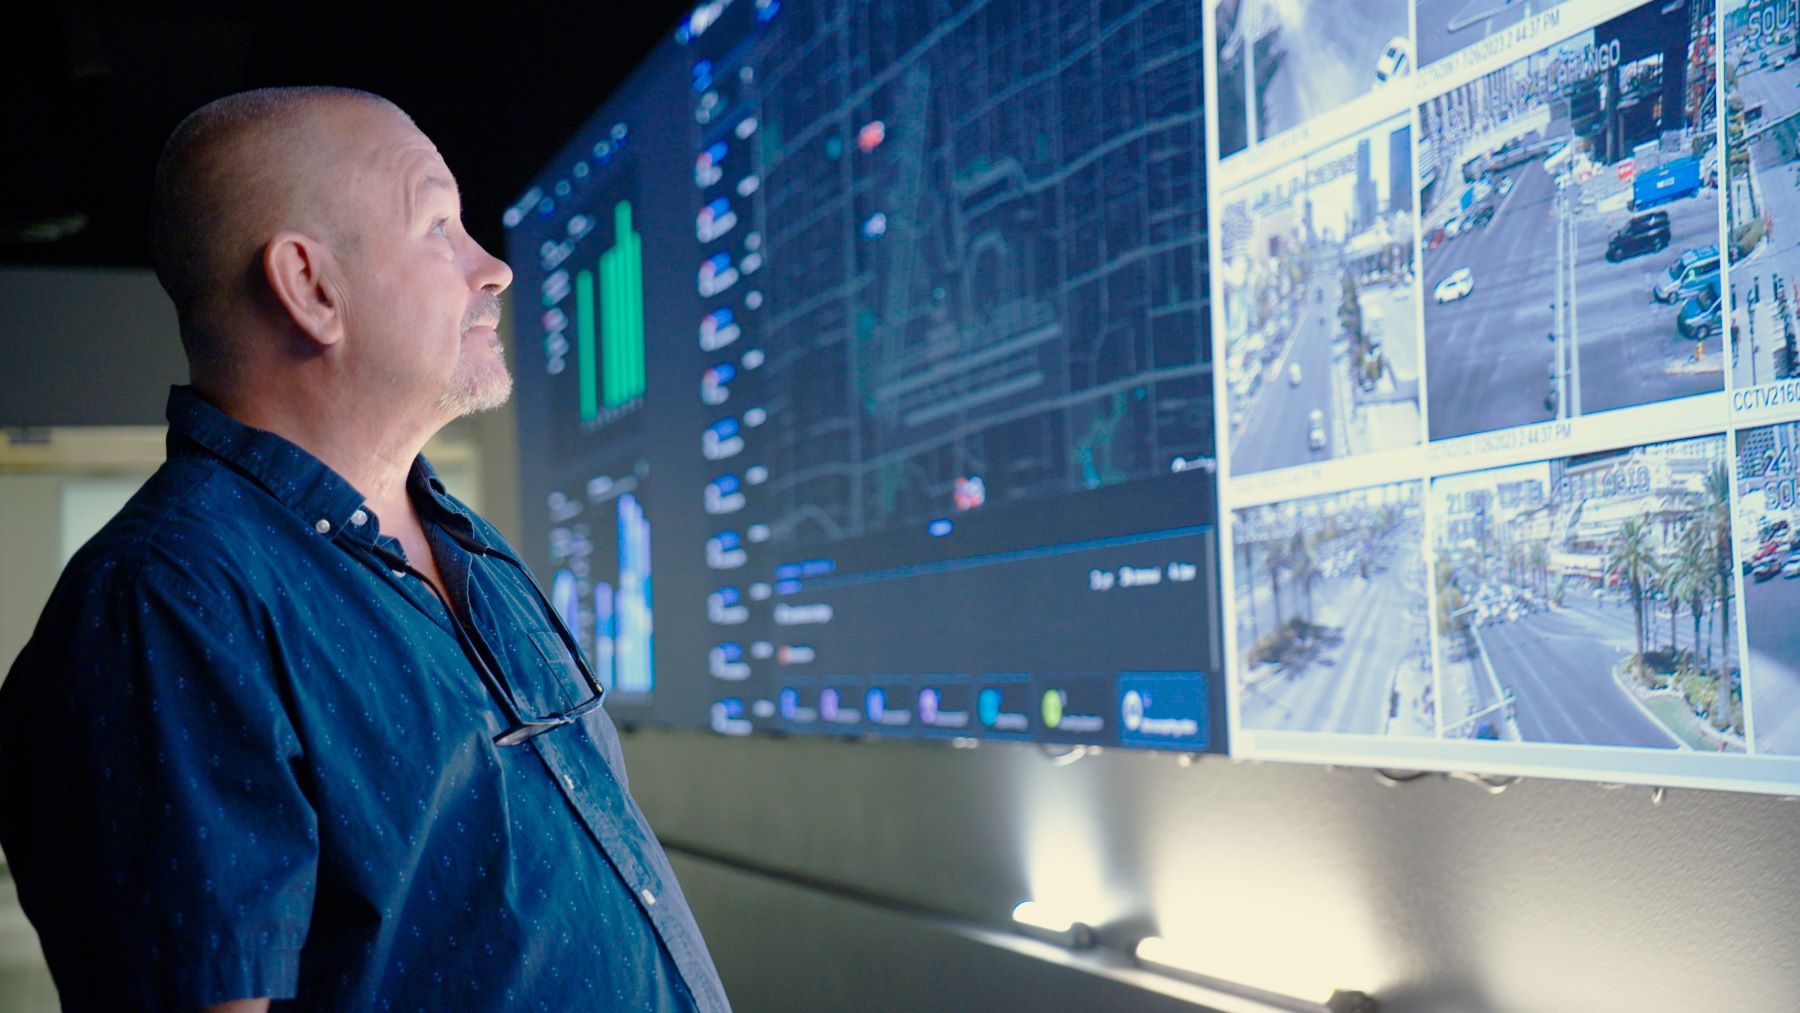 A man stands in front of a large screen looking at traffic cameras showing intersections around a city.